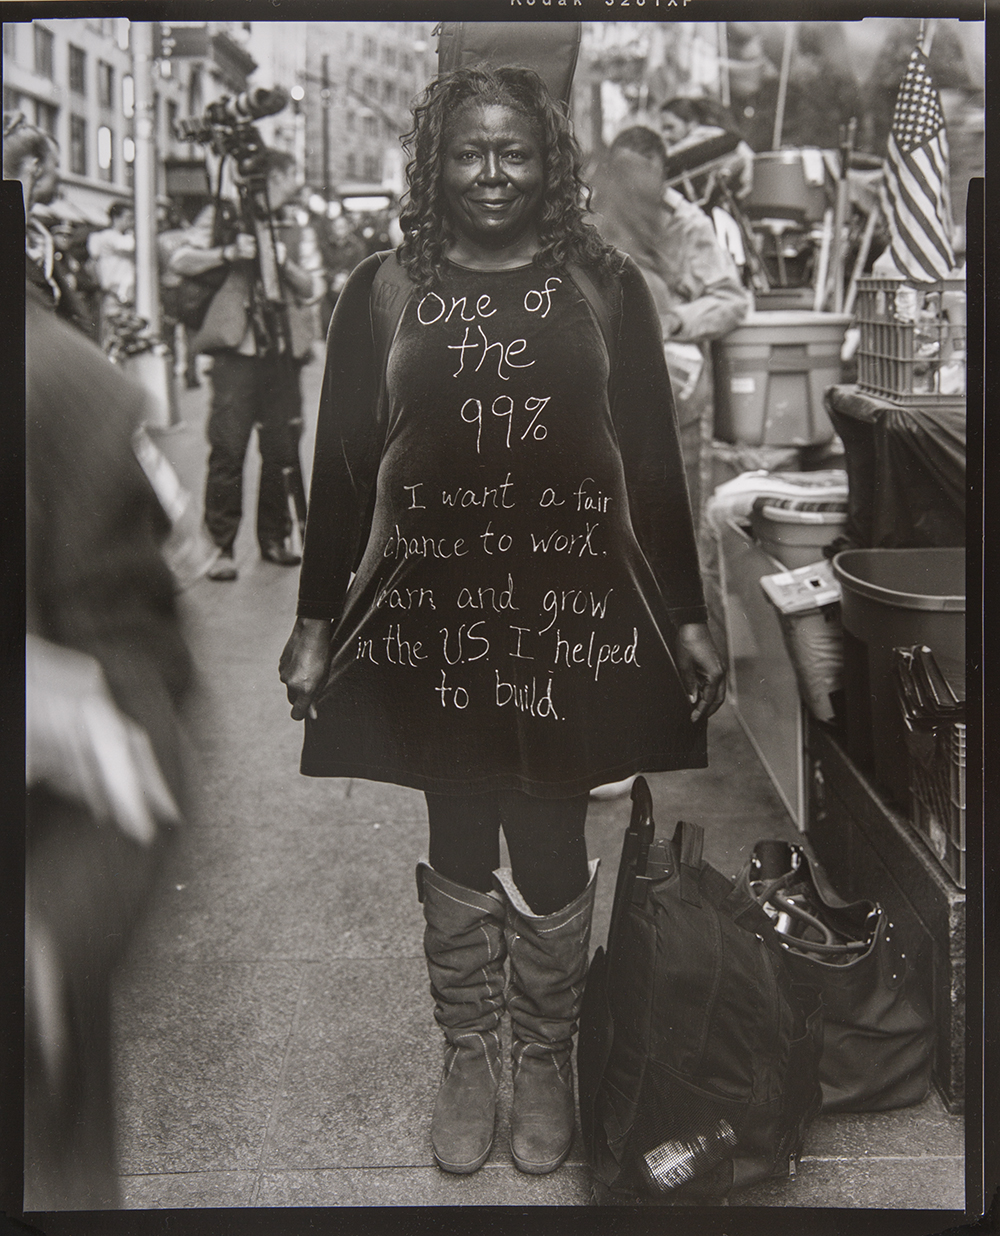 Photograph of a Black woman standing outside on a busy street in Manhattan during the Occupy Wall Street protest wearing a dress that reads: “One of the 99%. I want a fair chance to work, learn and grow in the U.S. I helped to build.”